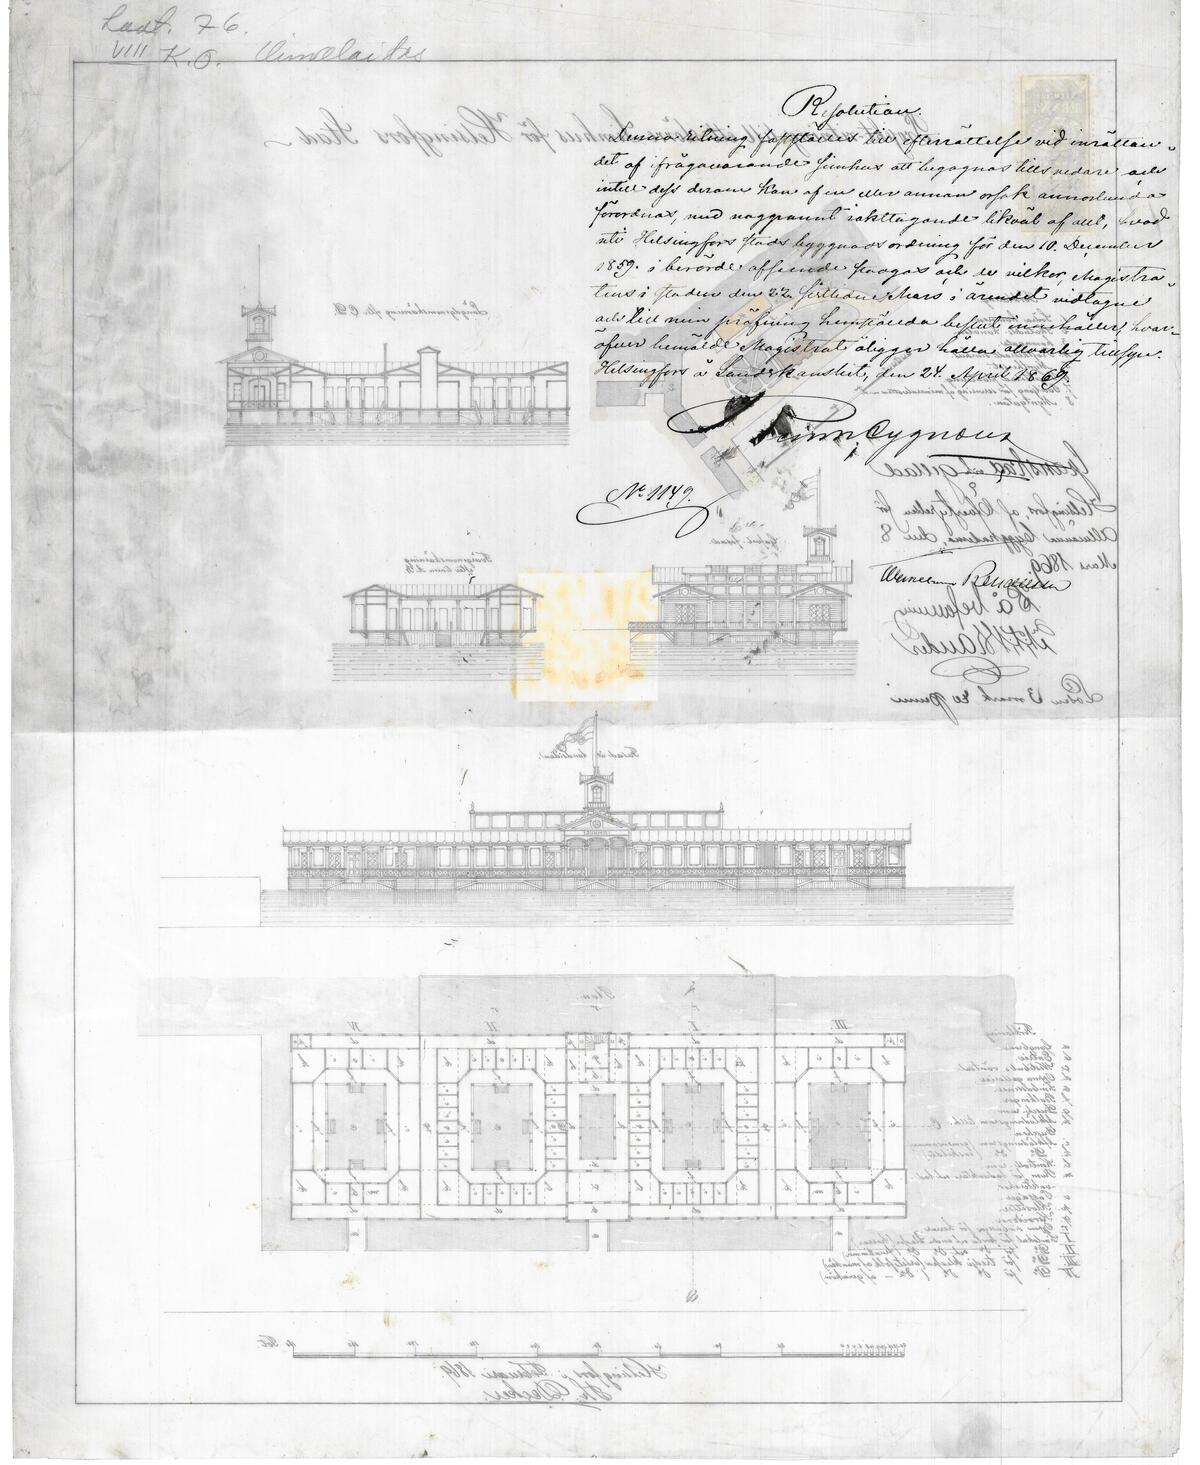 The drawings of the Katajanokka swimming facility with the signature of architect Theodor Decker in February 1869. Photo: Helsinki City Archive